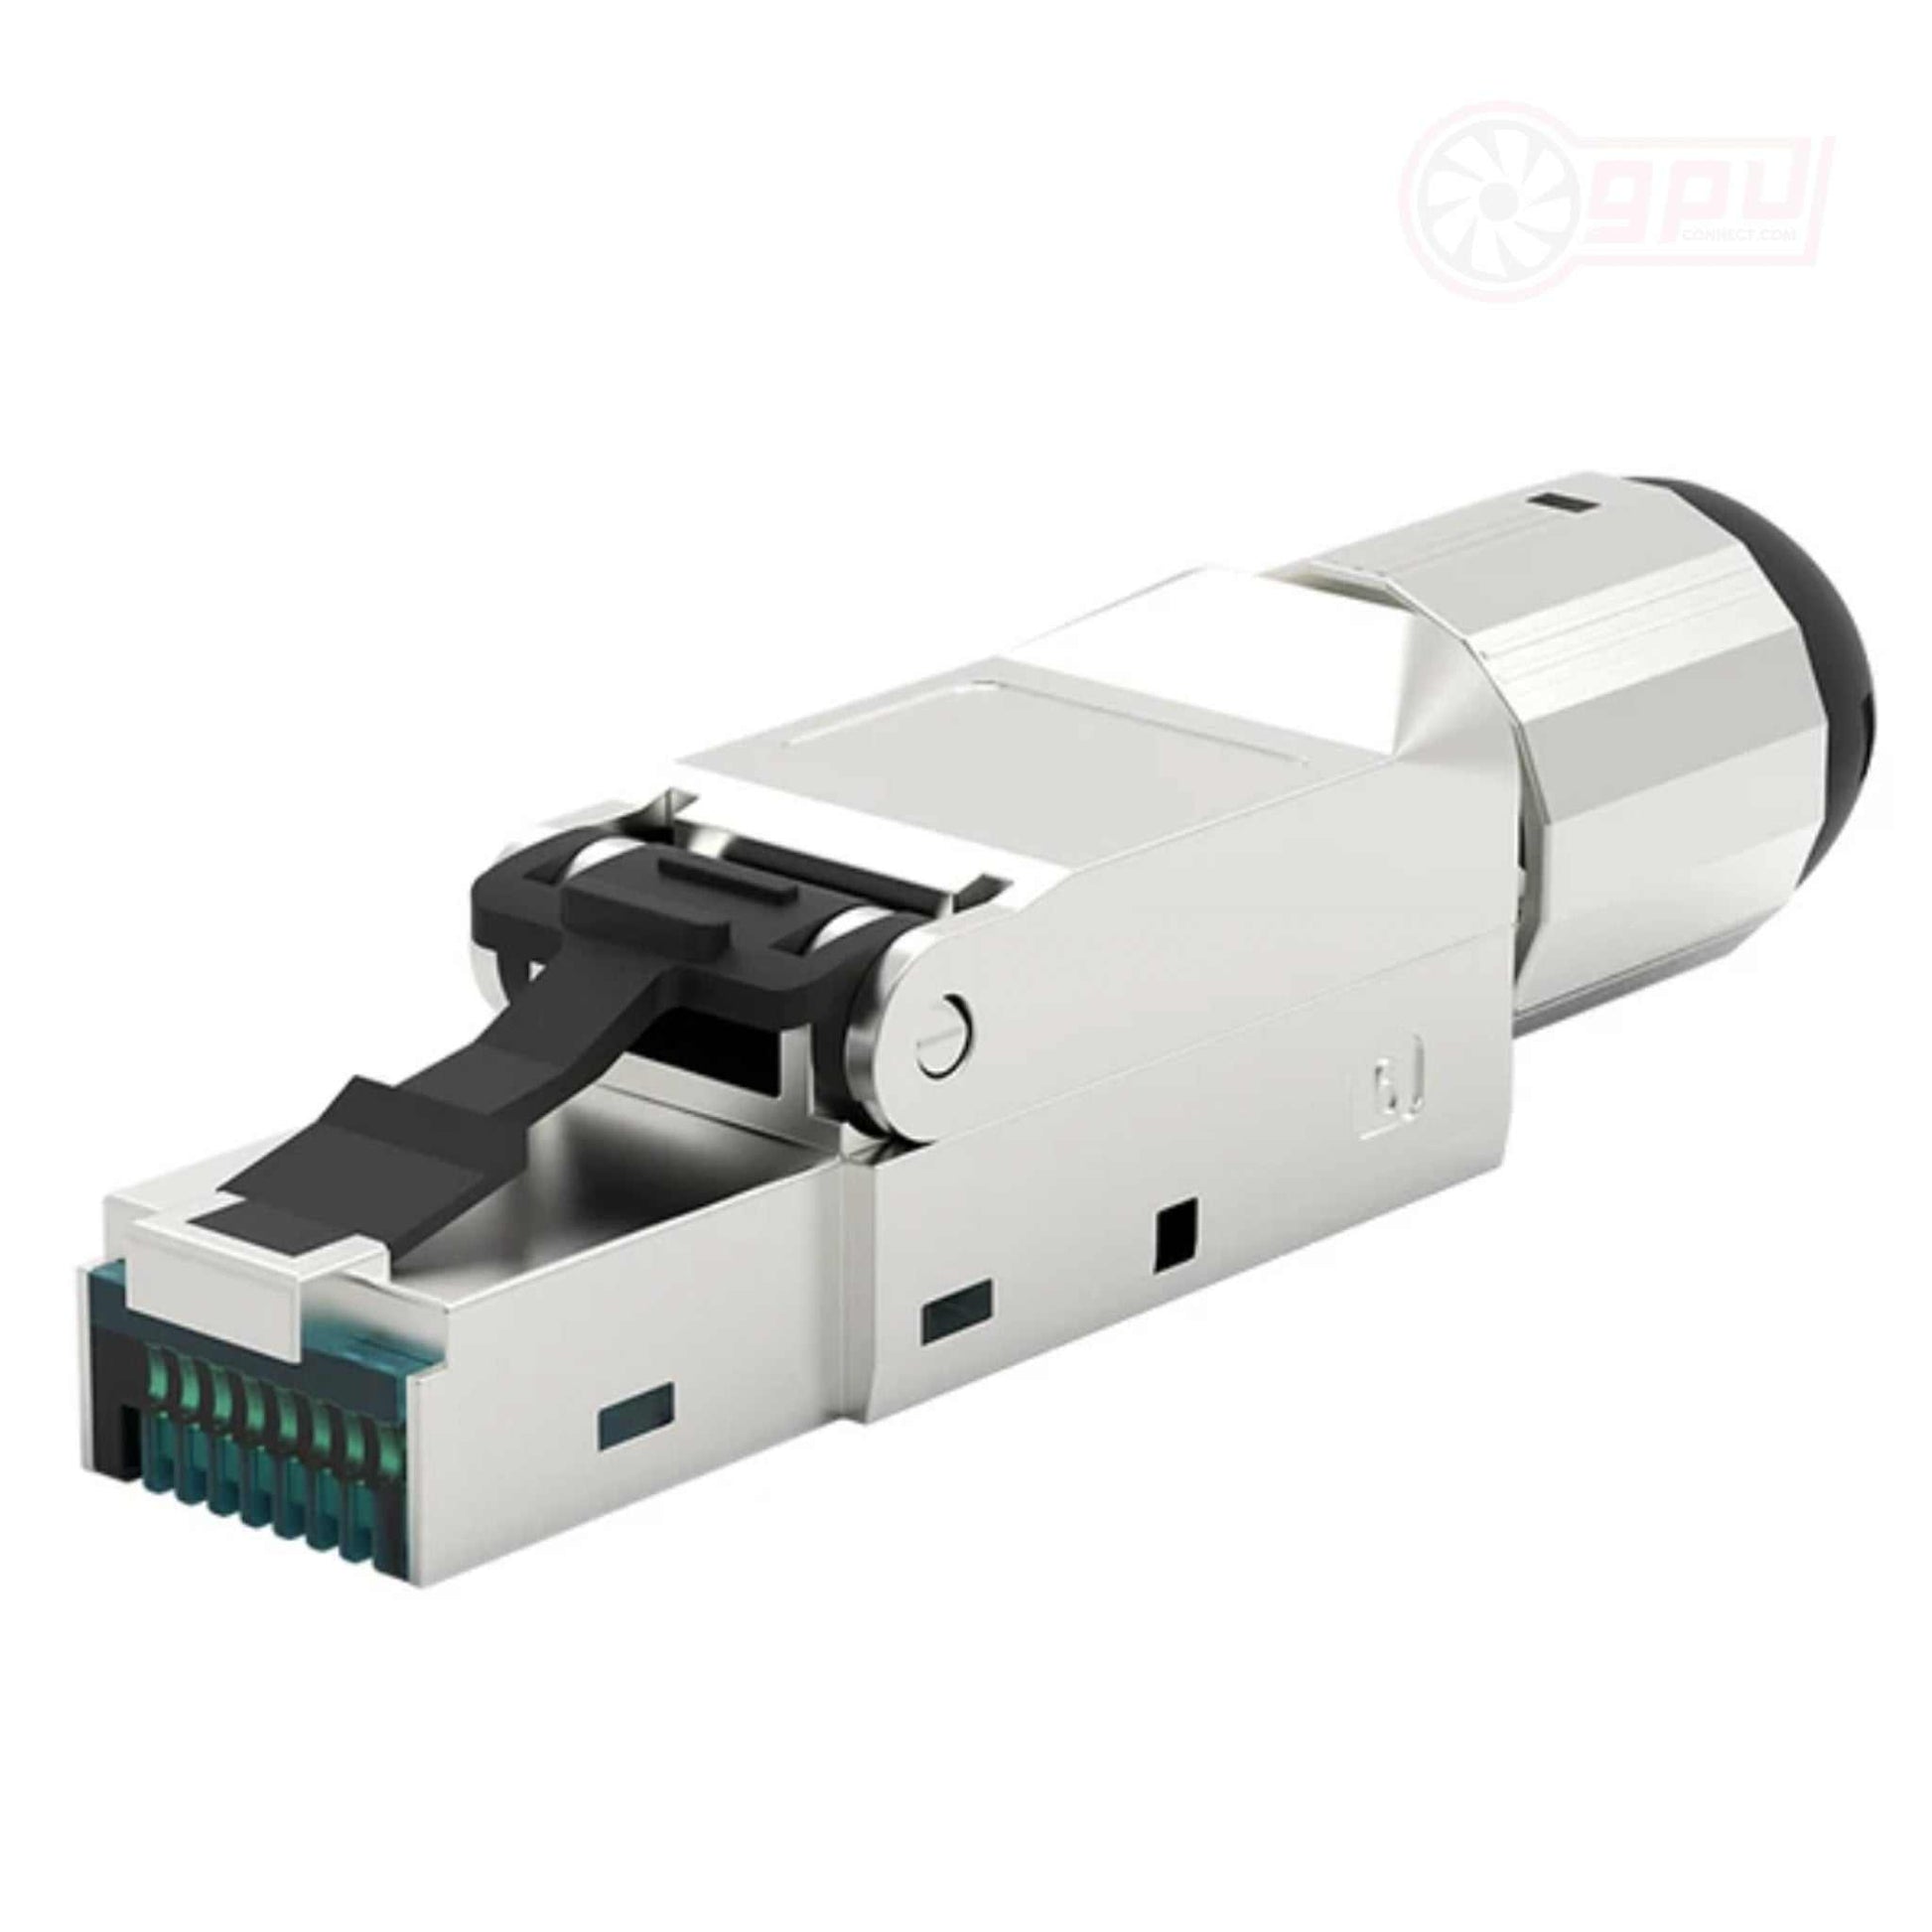 Linkwylan RJ45 Toolless Field Connector CAT 6A / 6 Termination Plug Shielded 10G - GPUCONNECT.COM